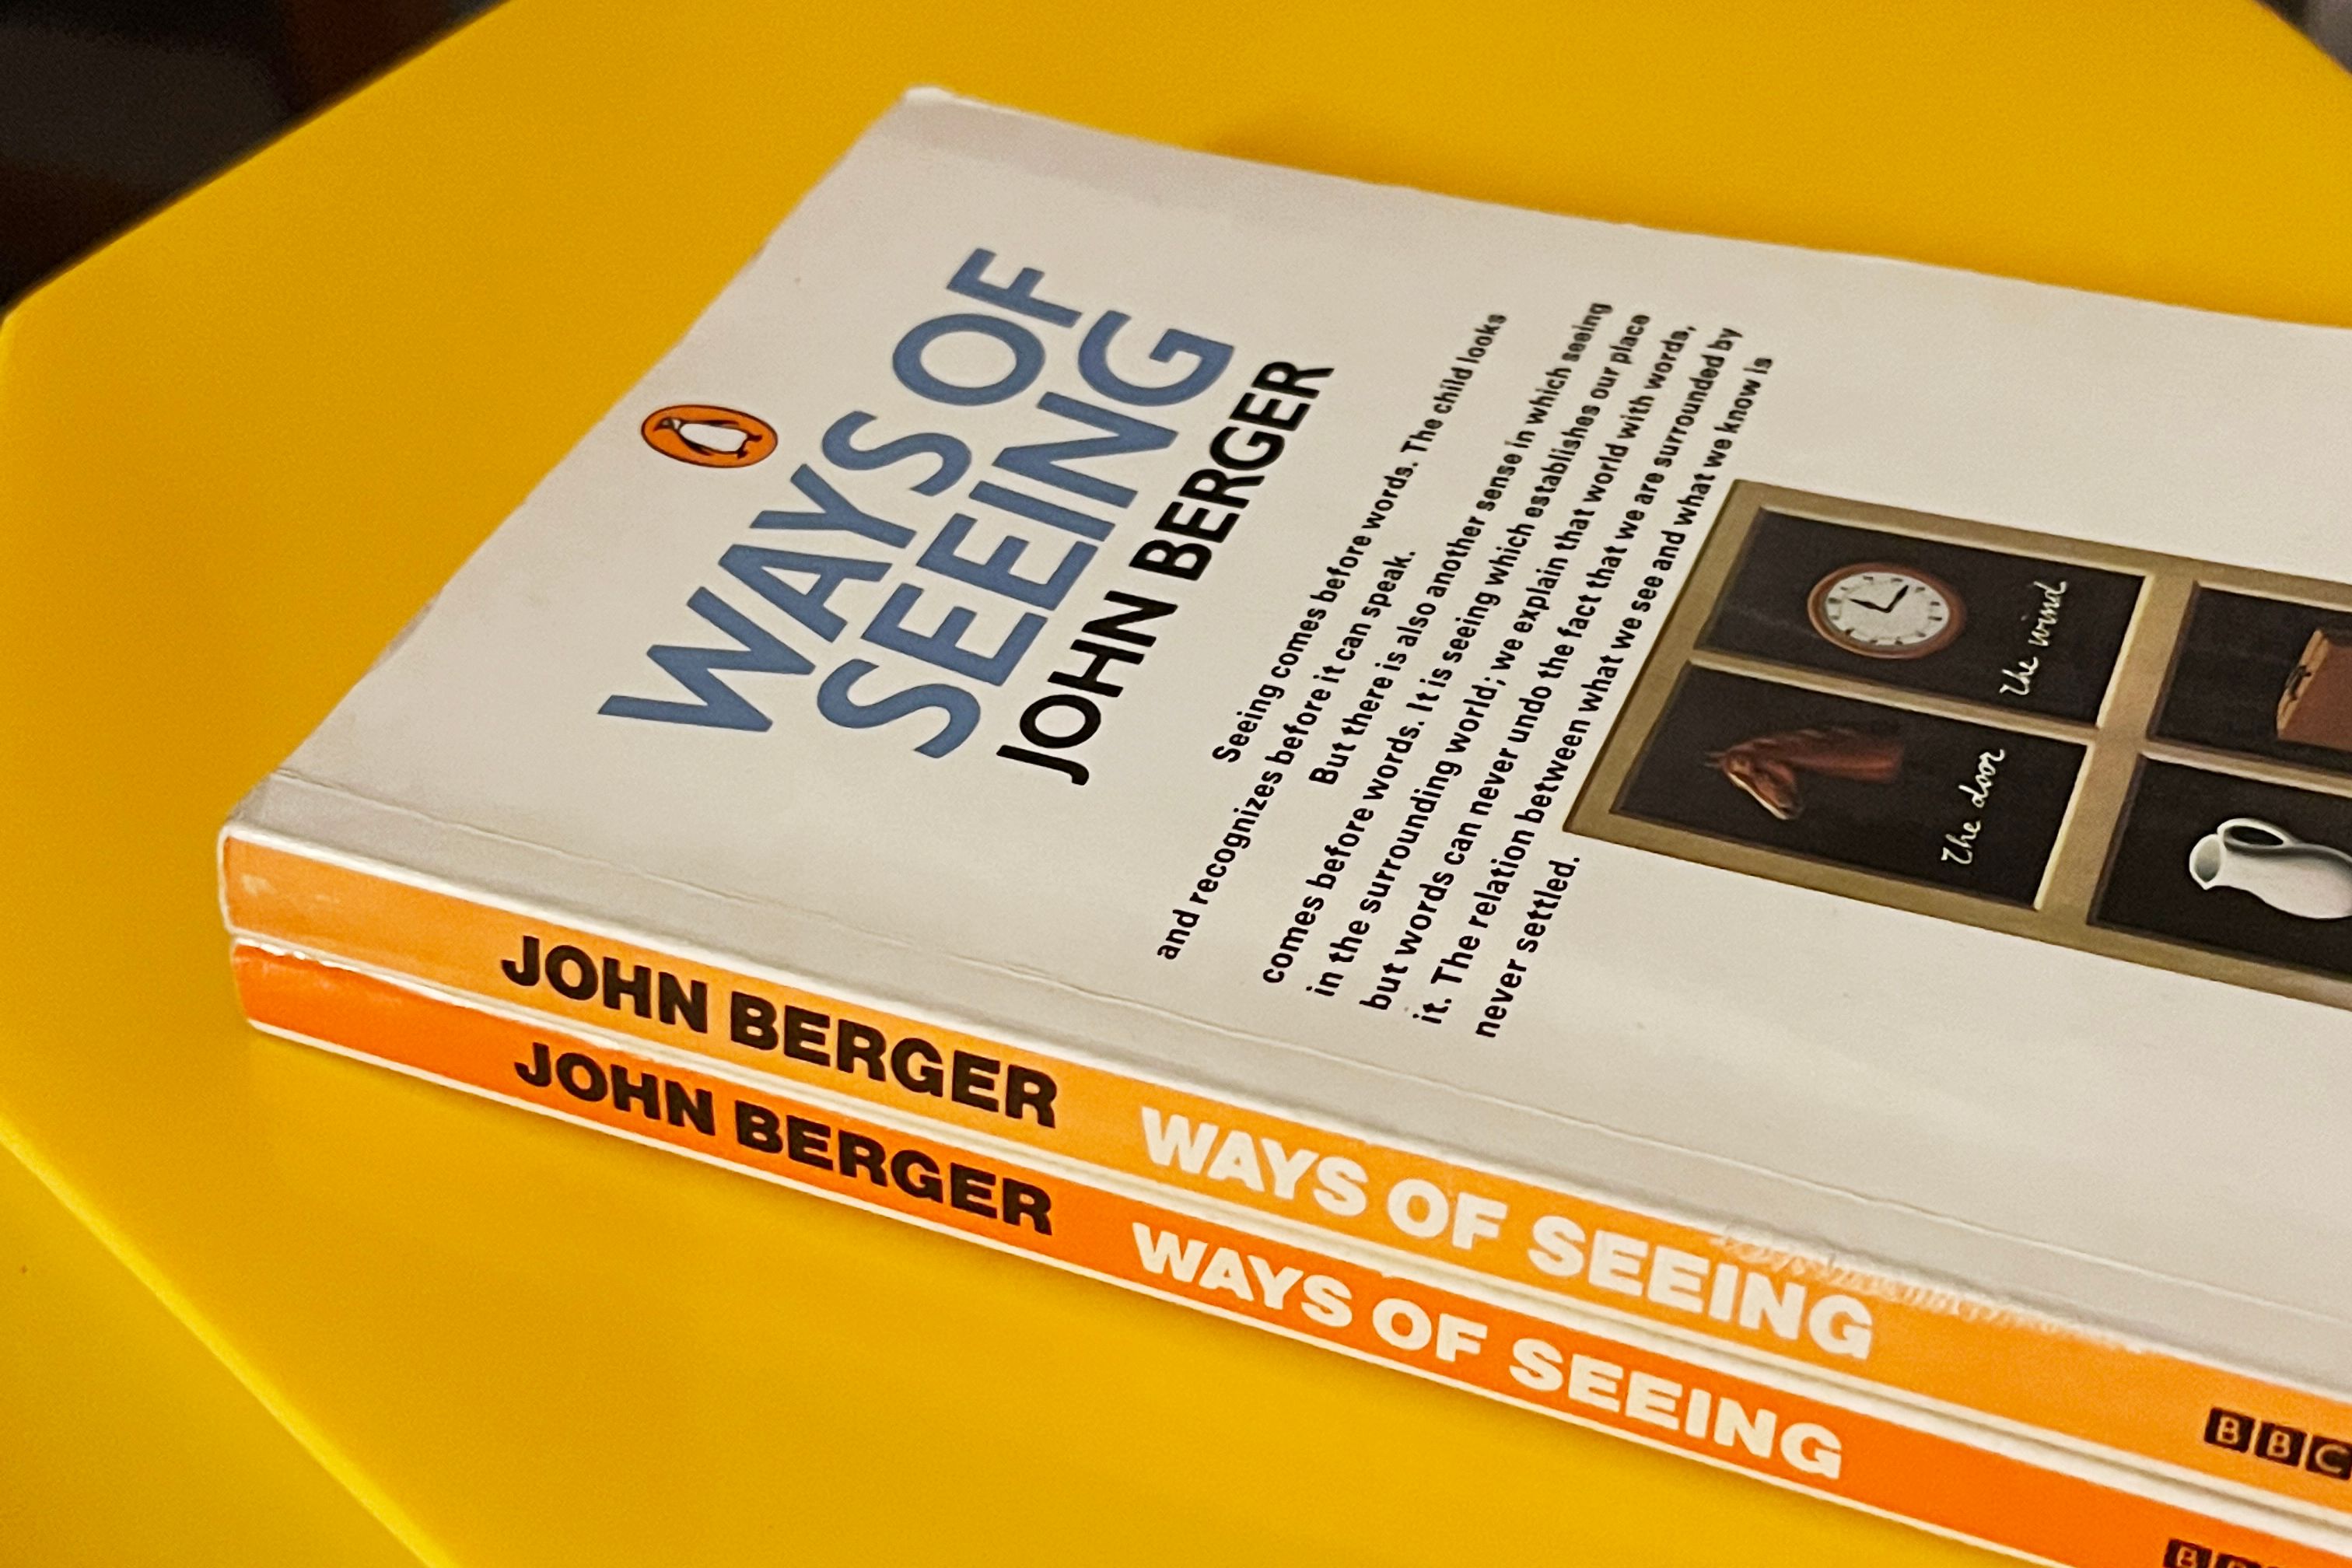 Two copies of the book Ways of Seeing by John Berger on table